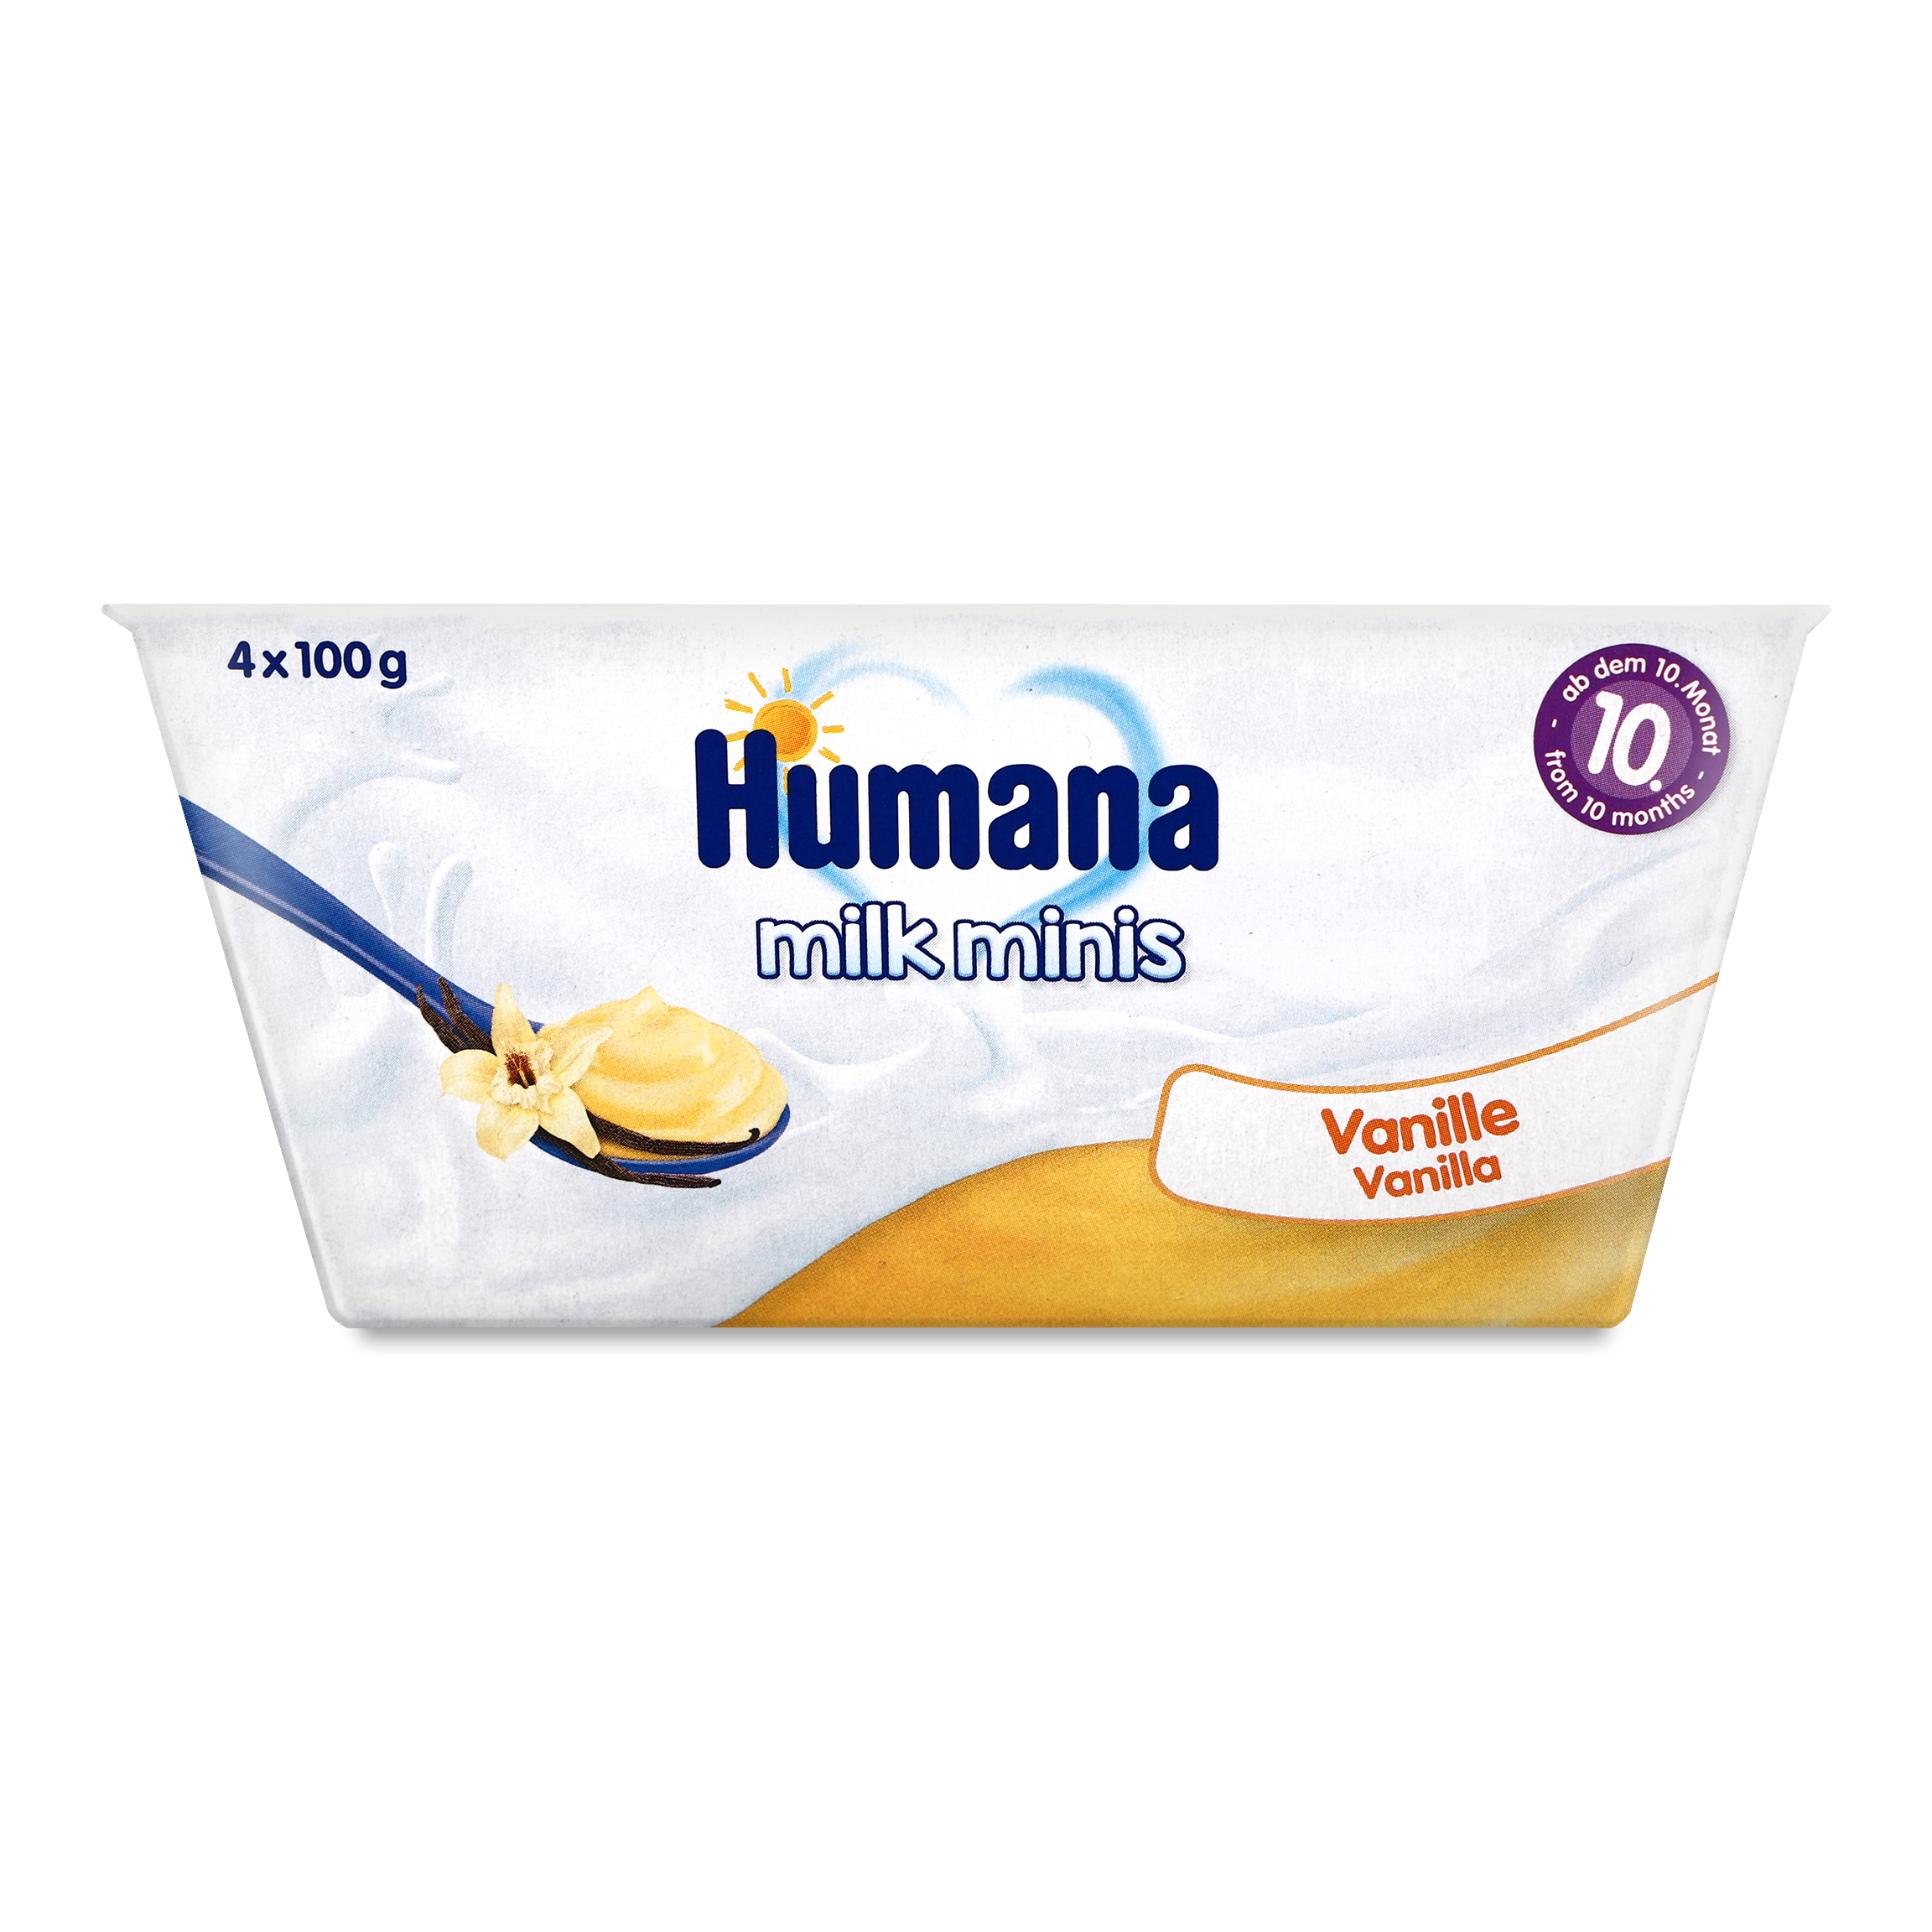 Pudding Humana vanilla for 10+ month babies 3.1% plastic cup Germany 4х100g